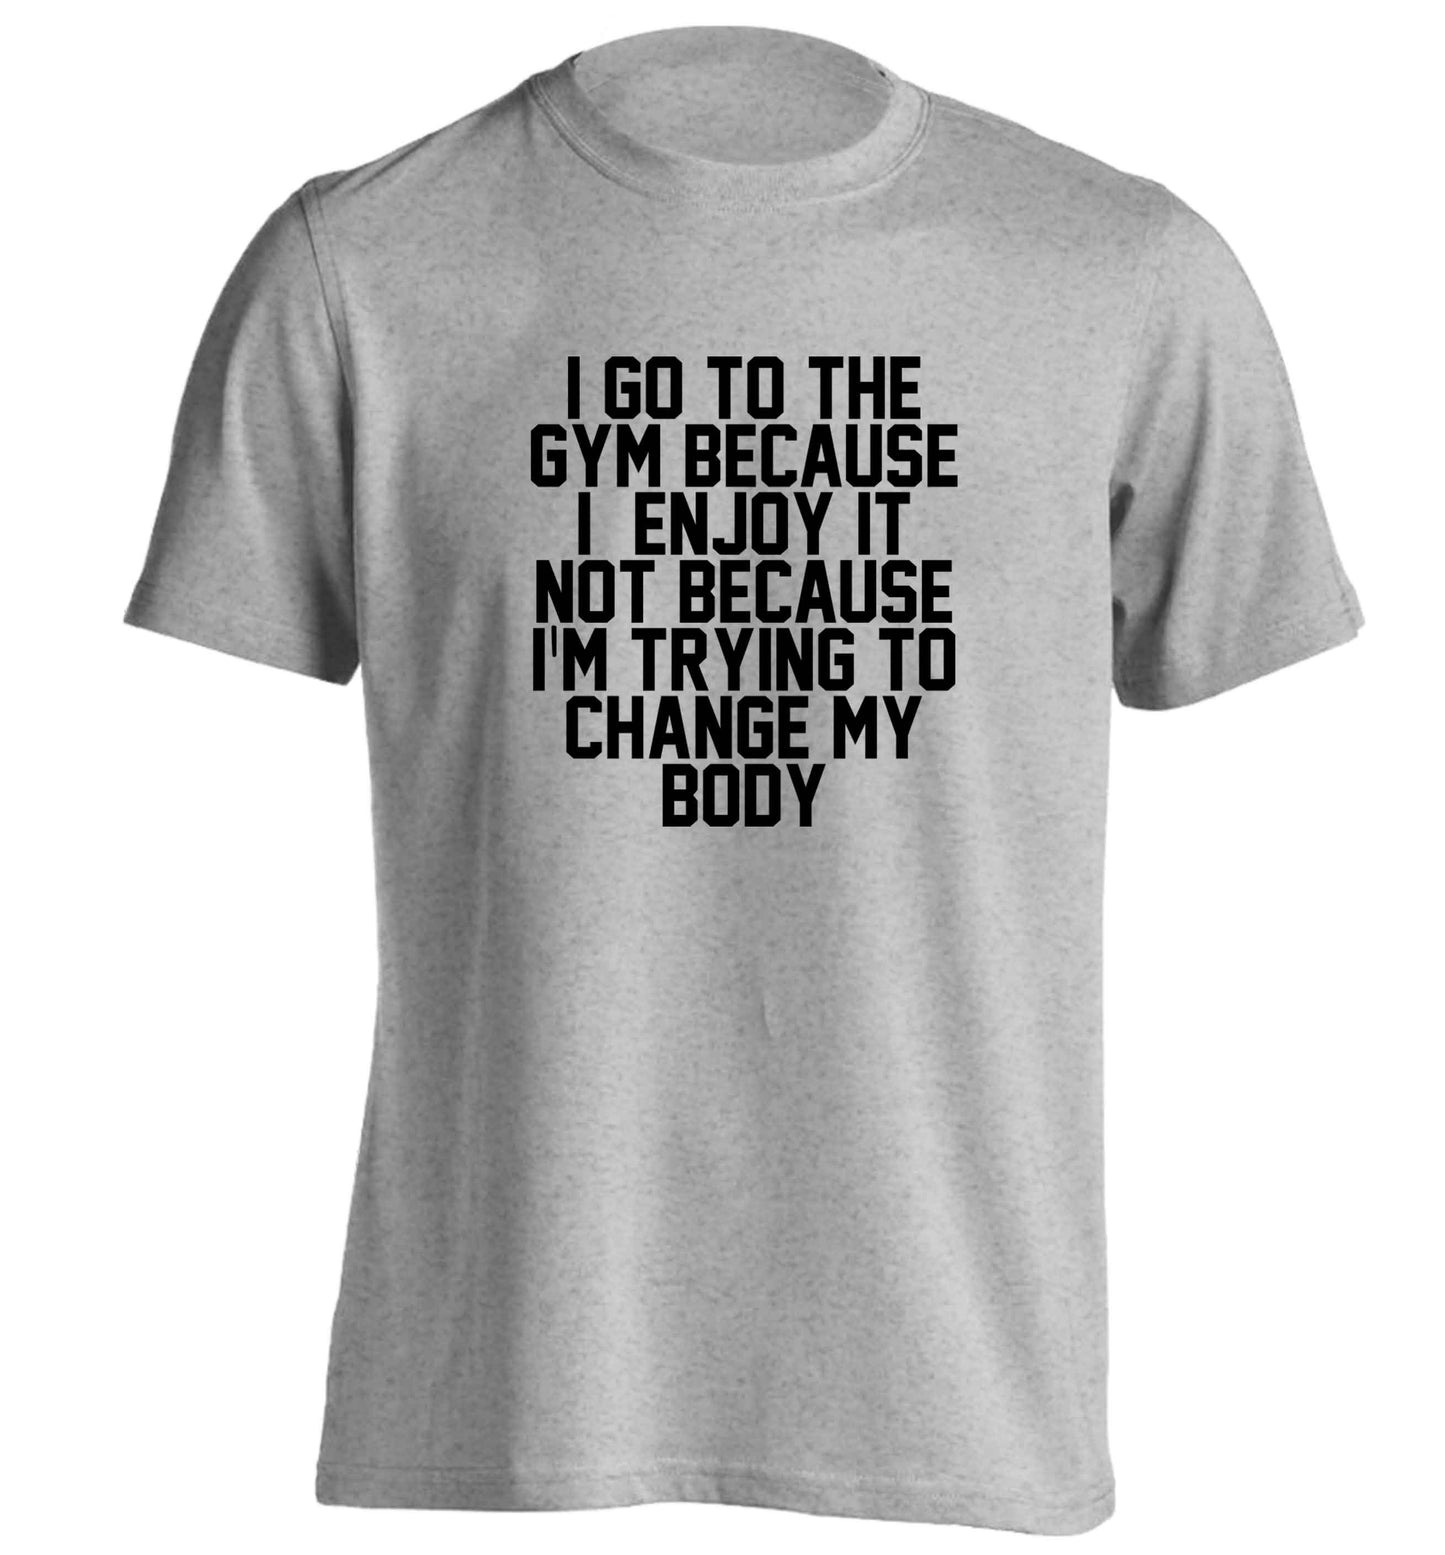 I go to the gym because I enjoy it not because I'm trying to change my body adults unisex grey Tshirt 2XL